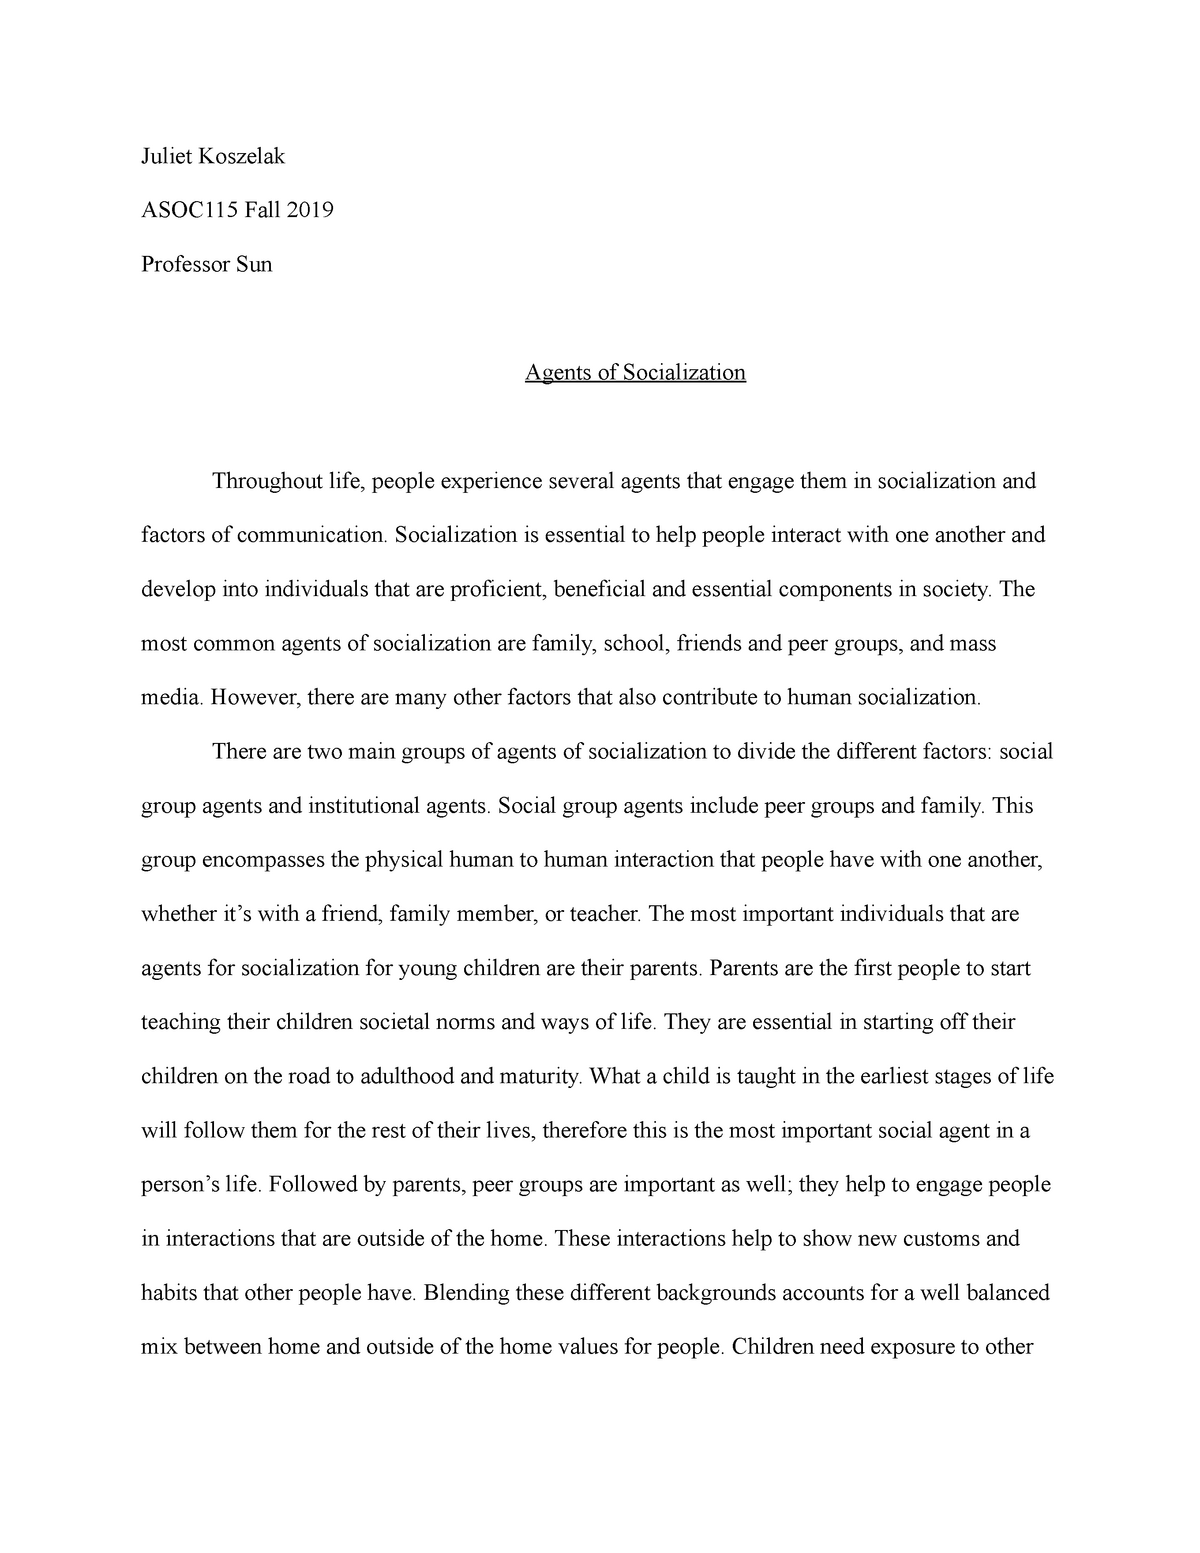 agents of socialization essay examples